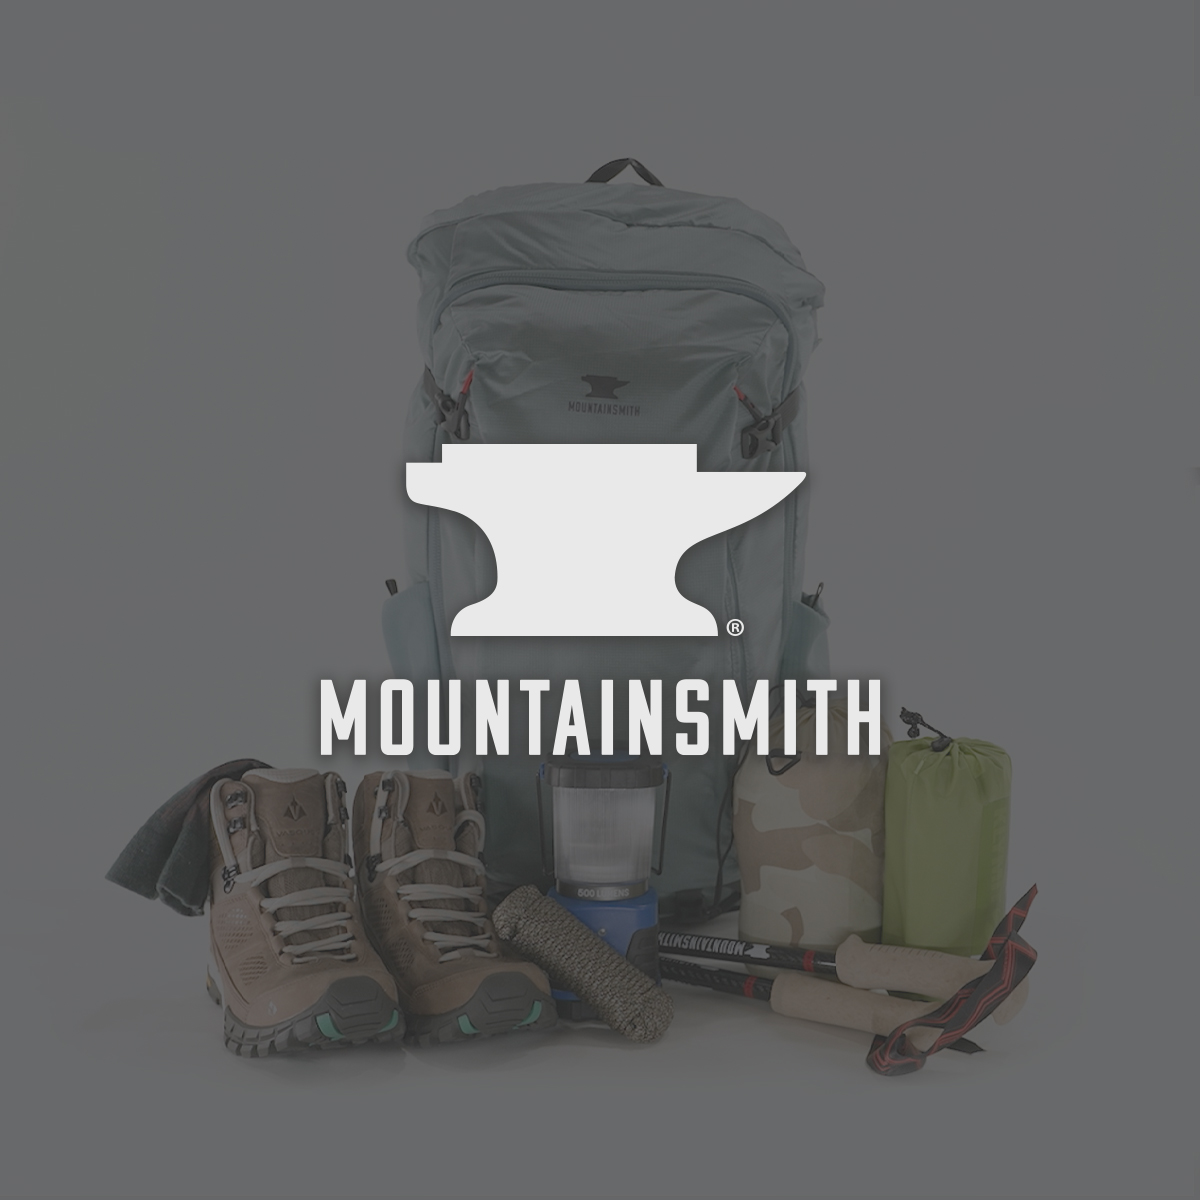 Mountainsmith Product Video - Featured Image